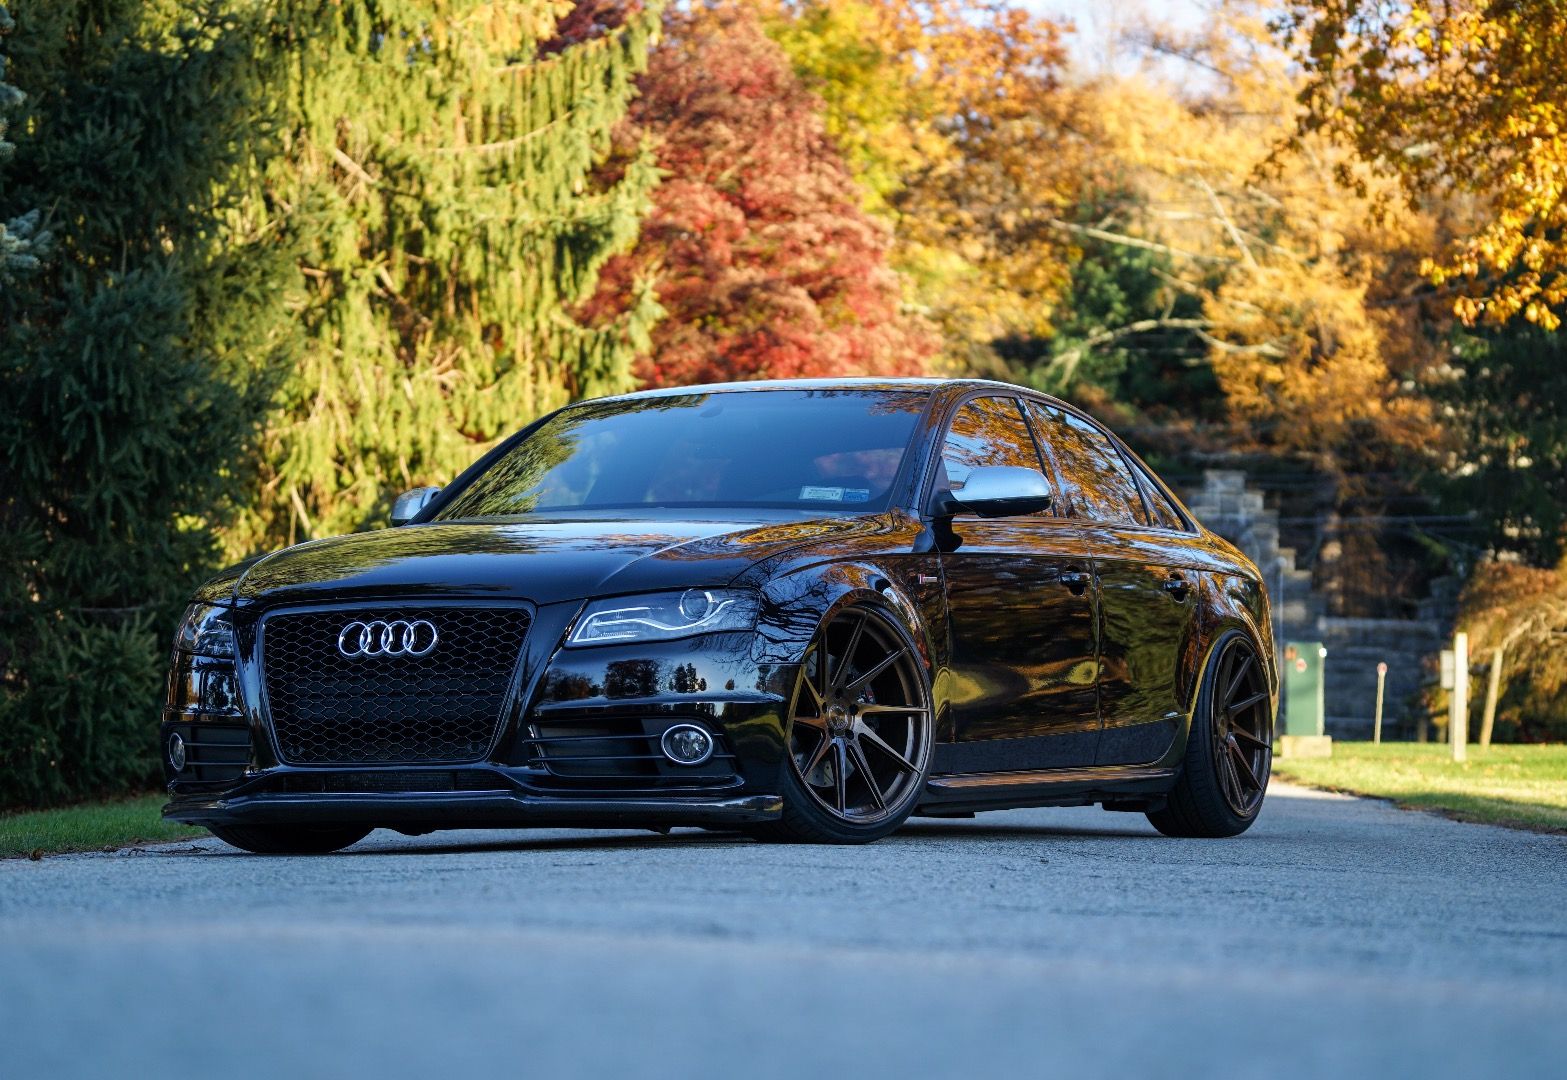 B8 S4 Modified Wheels & Suspension Gallery Thread - Page 87 | Luxury cars  audi, Audi s4, Audi cars